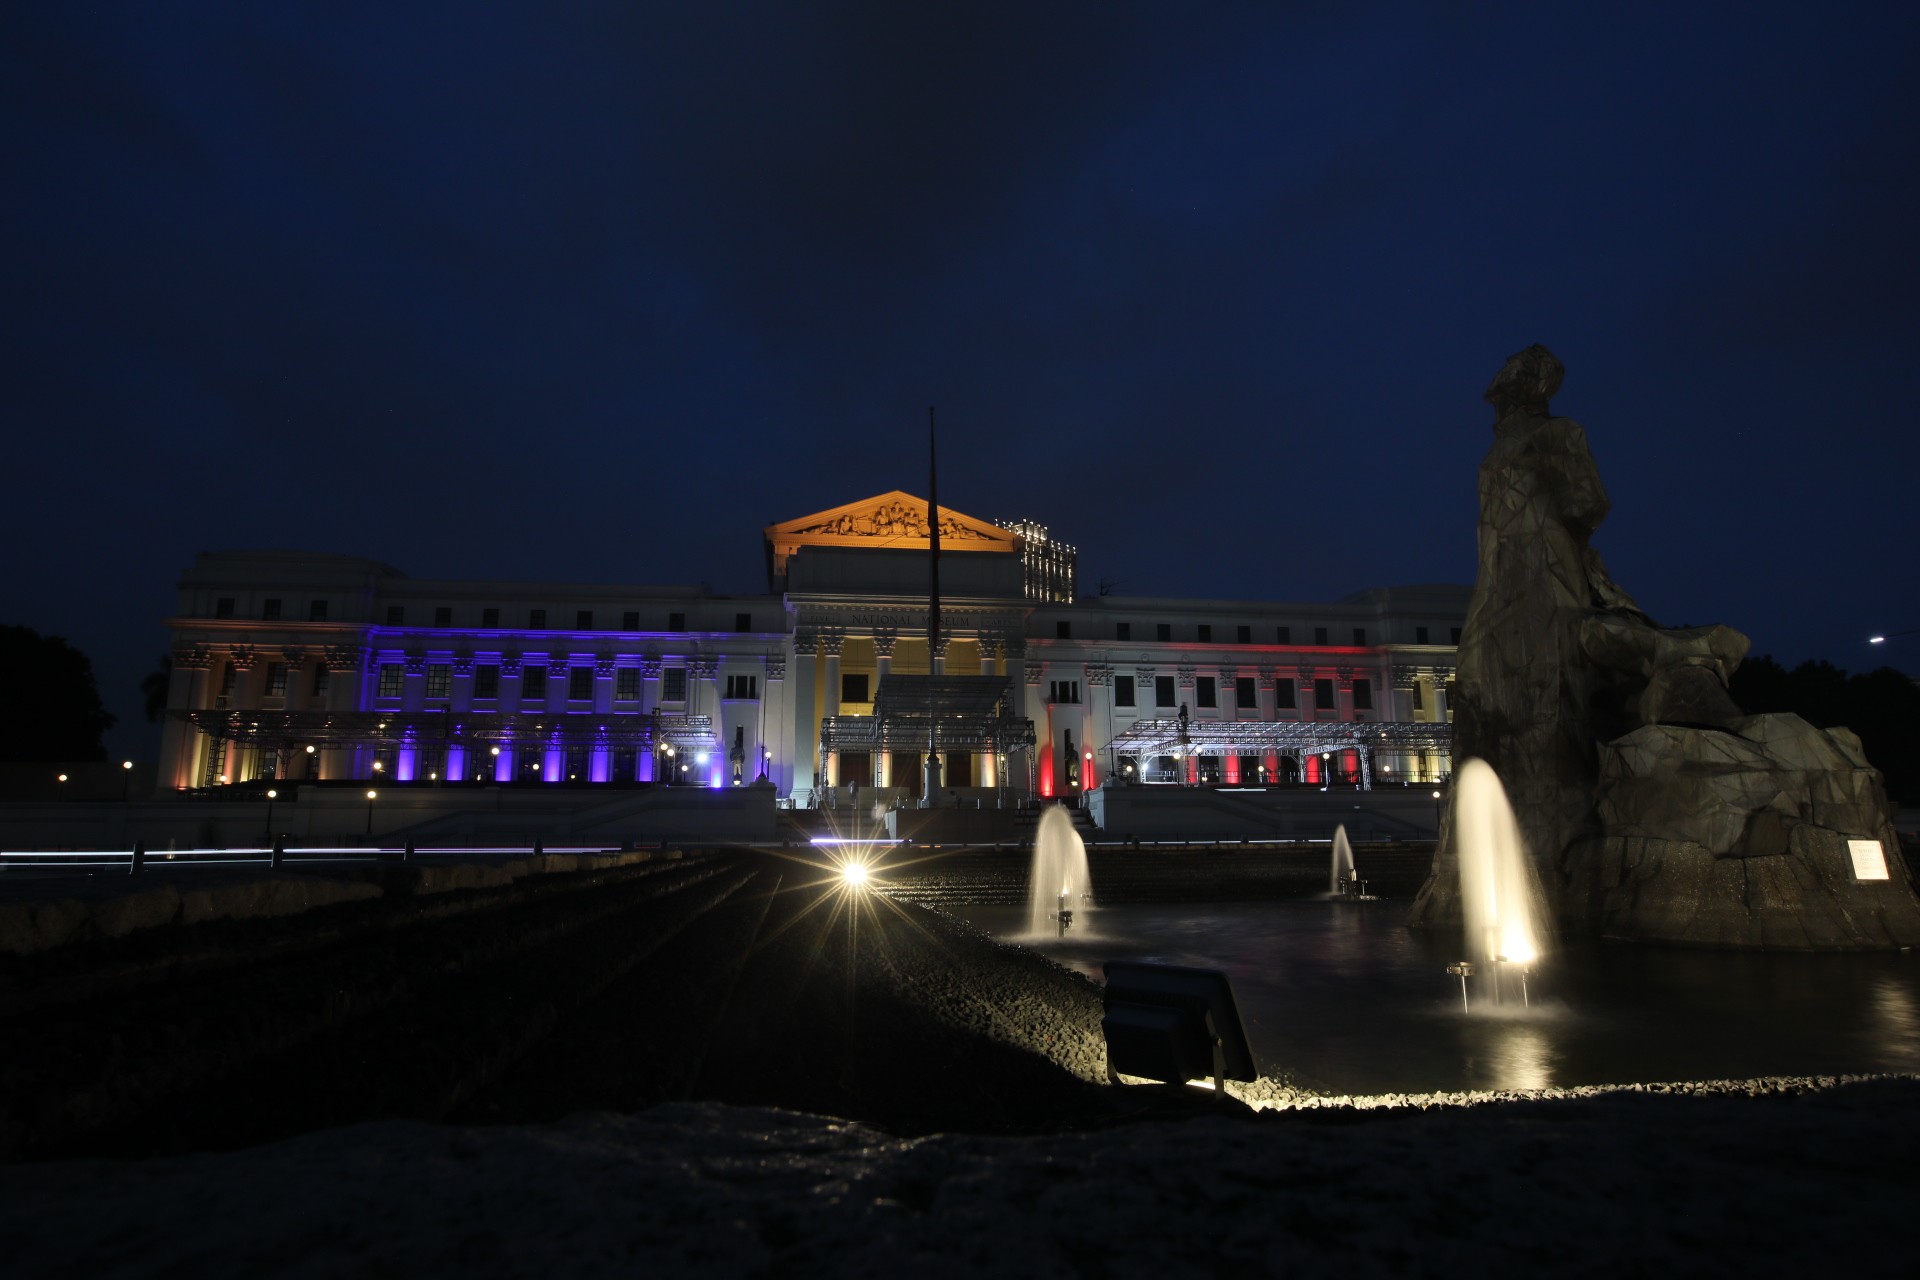 Facade of the National Museum of the Philippines